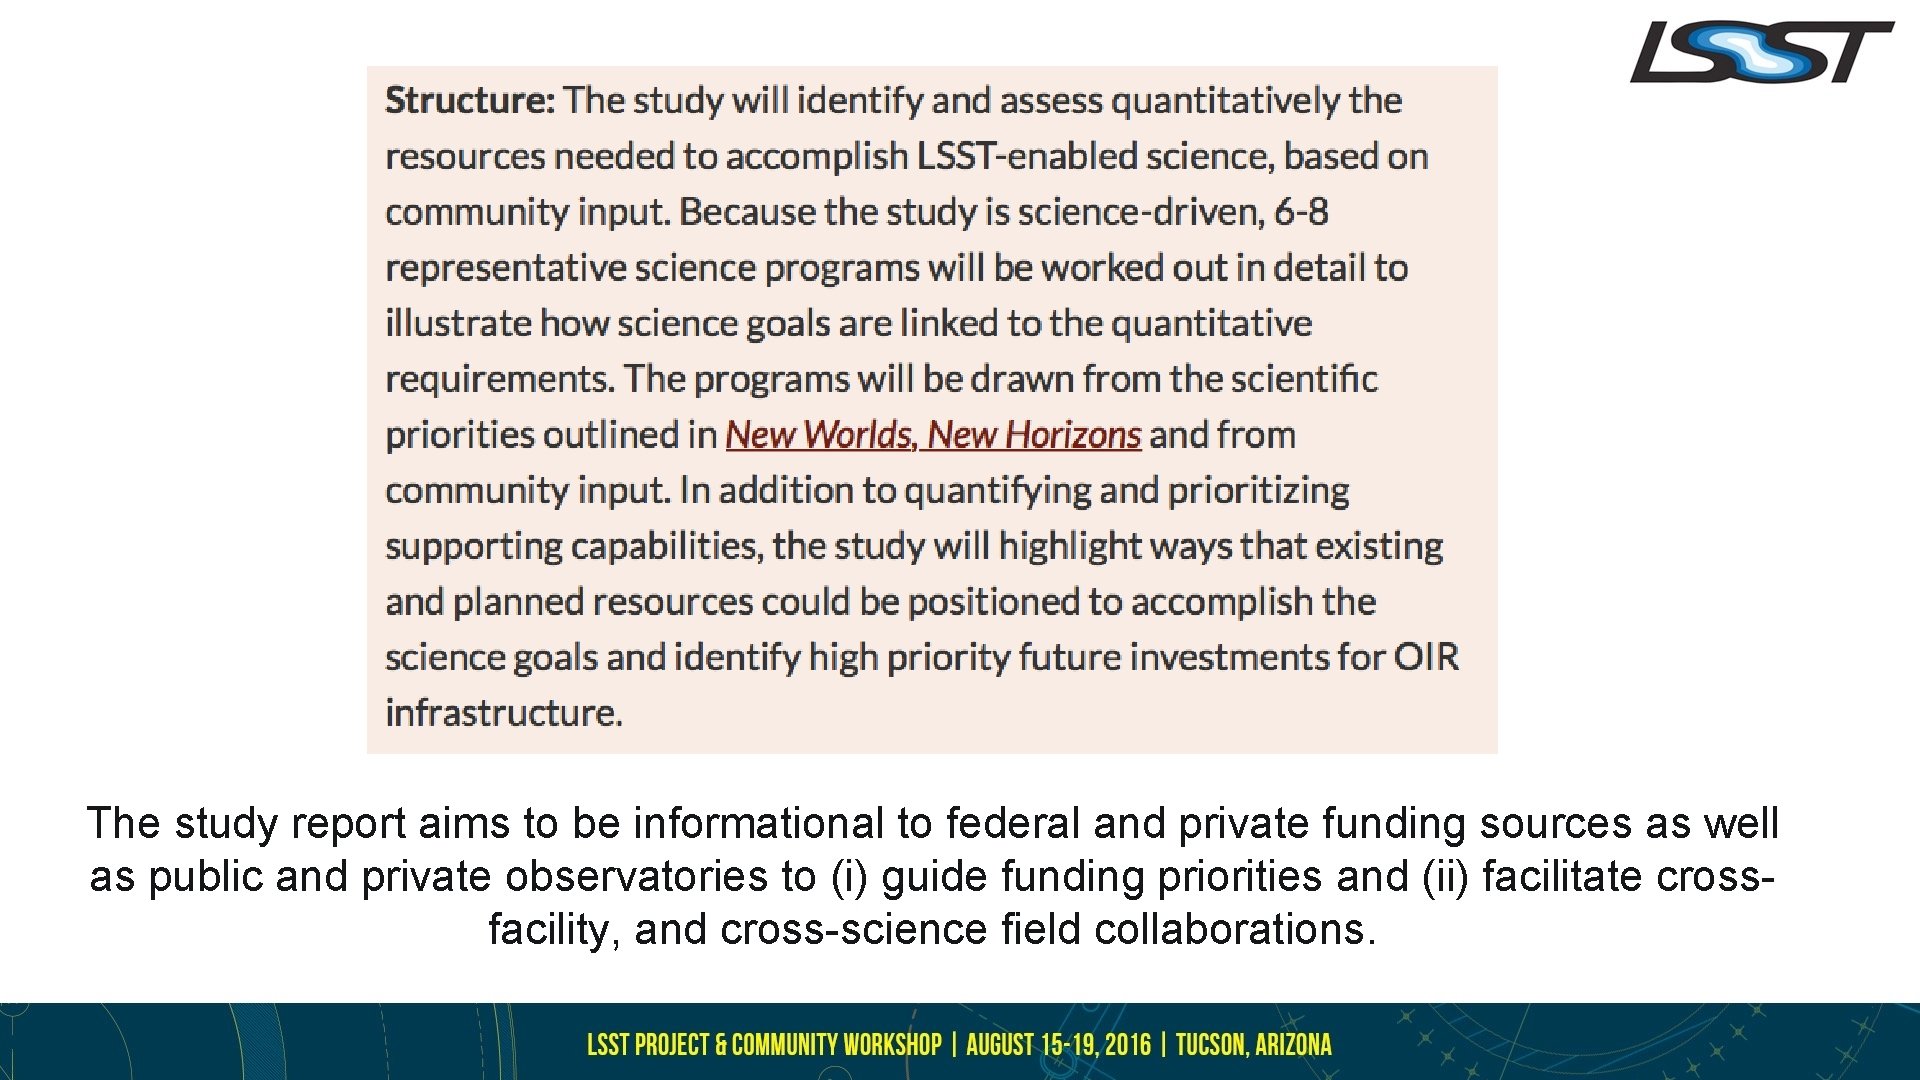 The study report aims to be informational to federal and private funding sources as